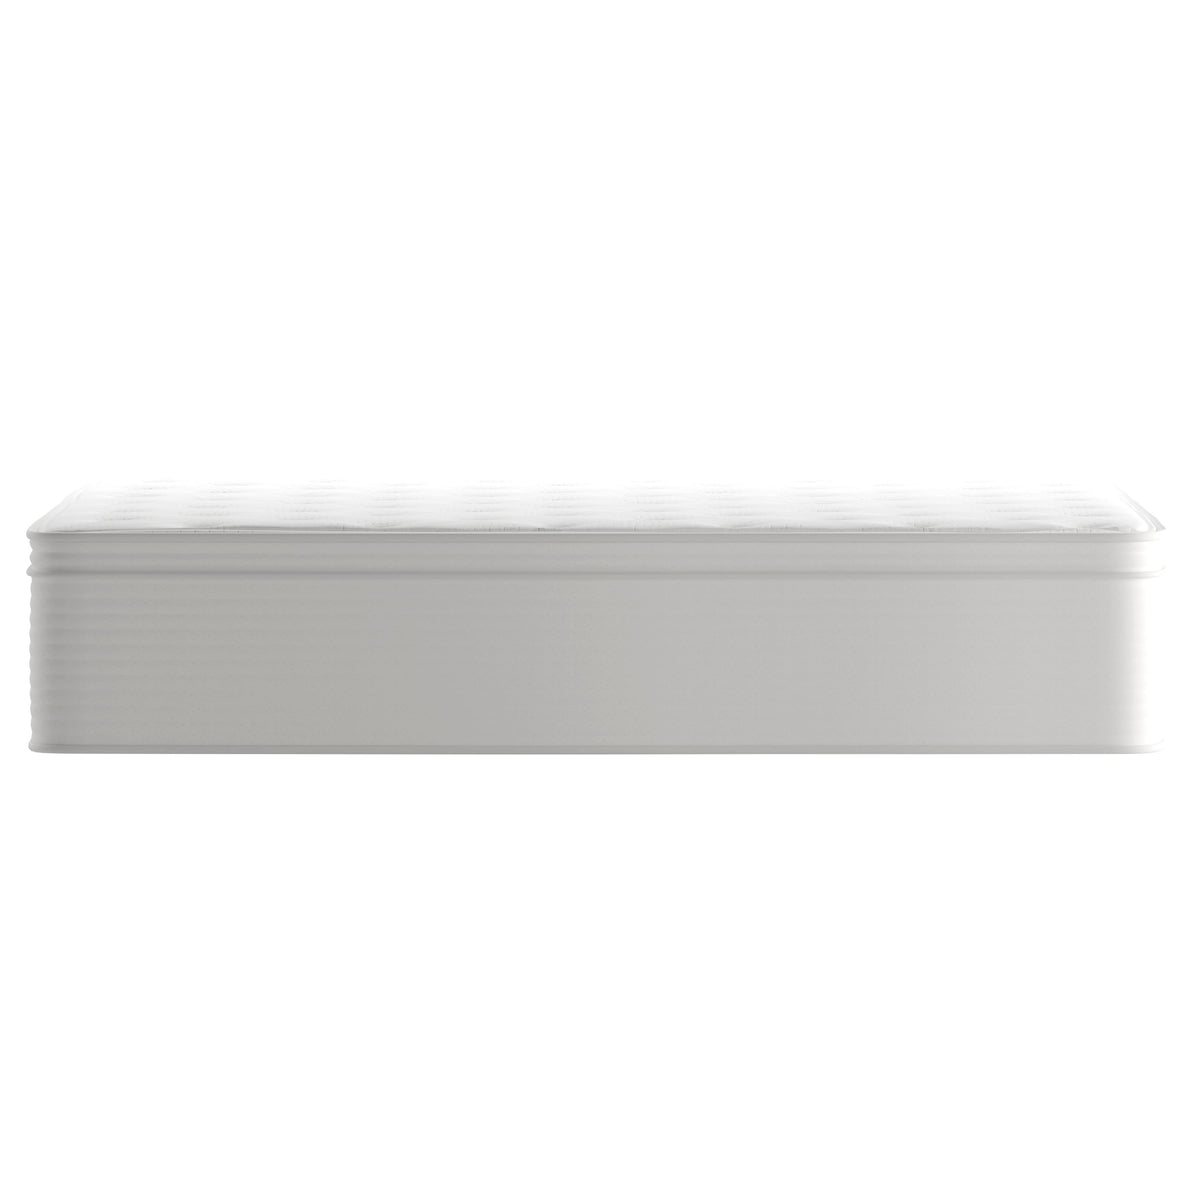 King |#| Commercial 14 Inch Memory Foam and Pocket Spring Hybrid Mattress in a Box - King